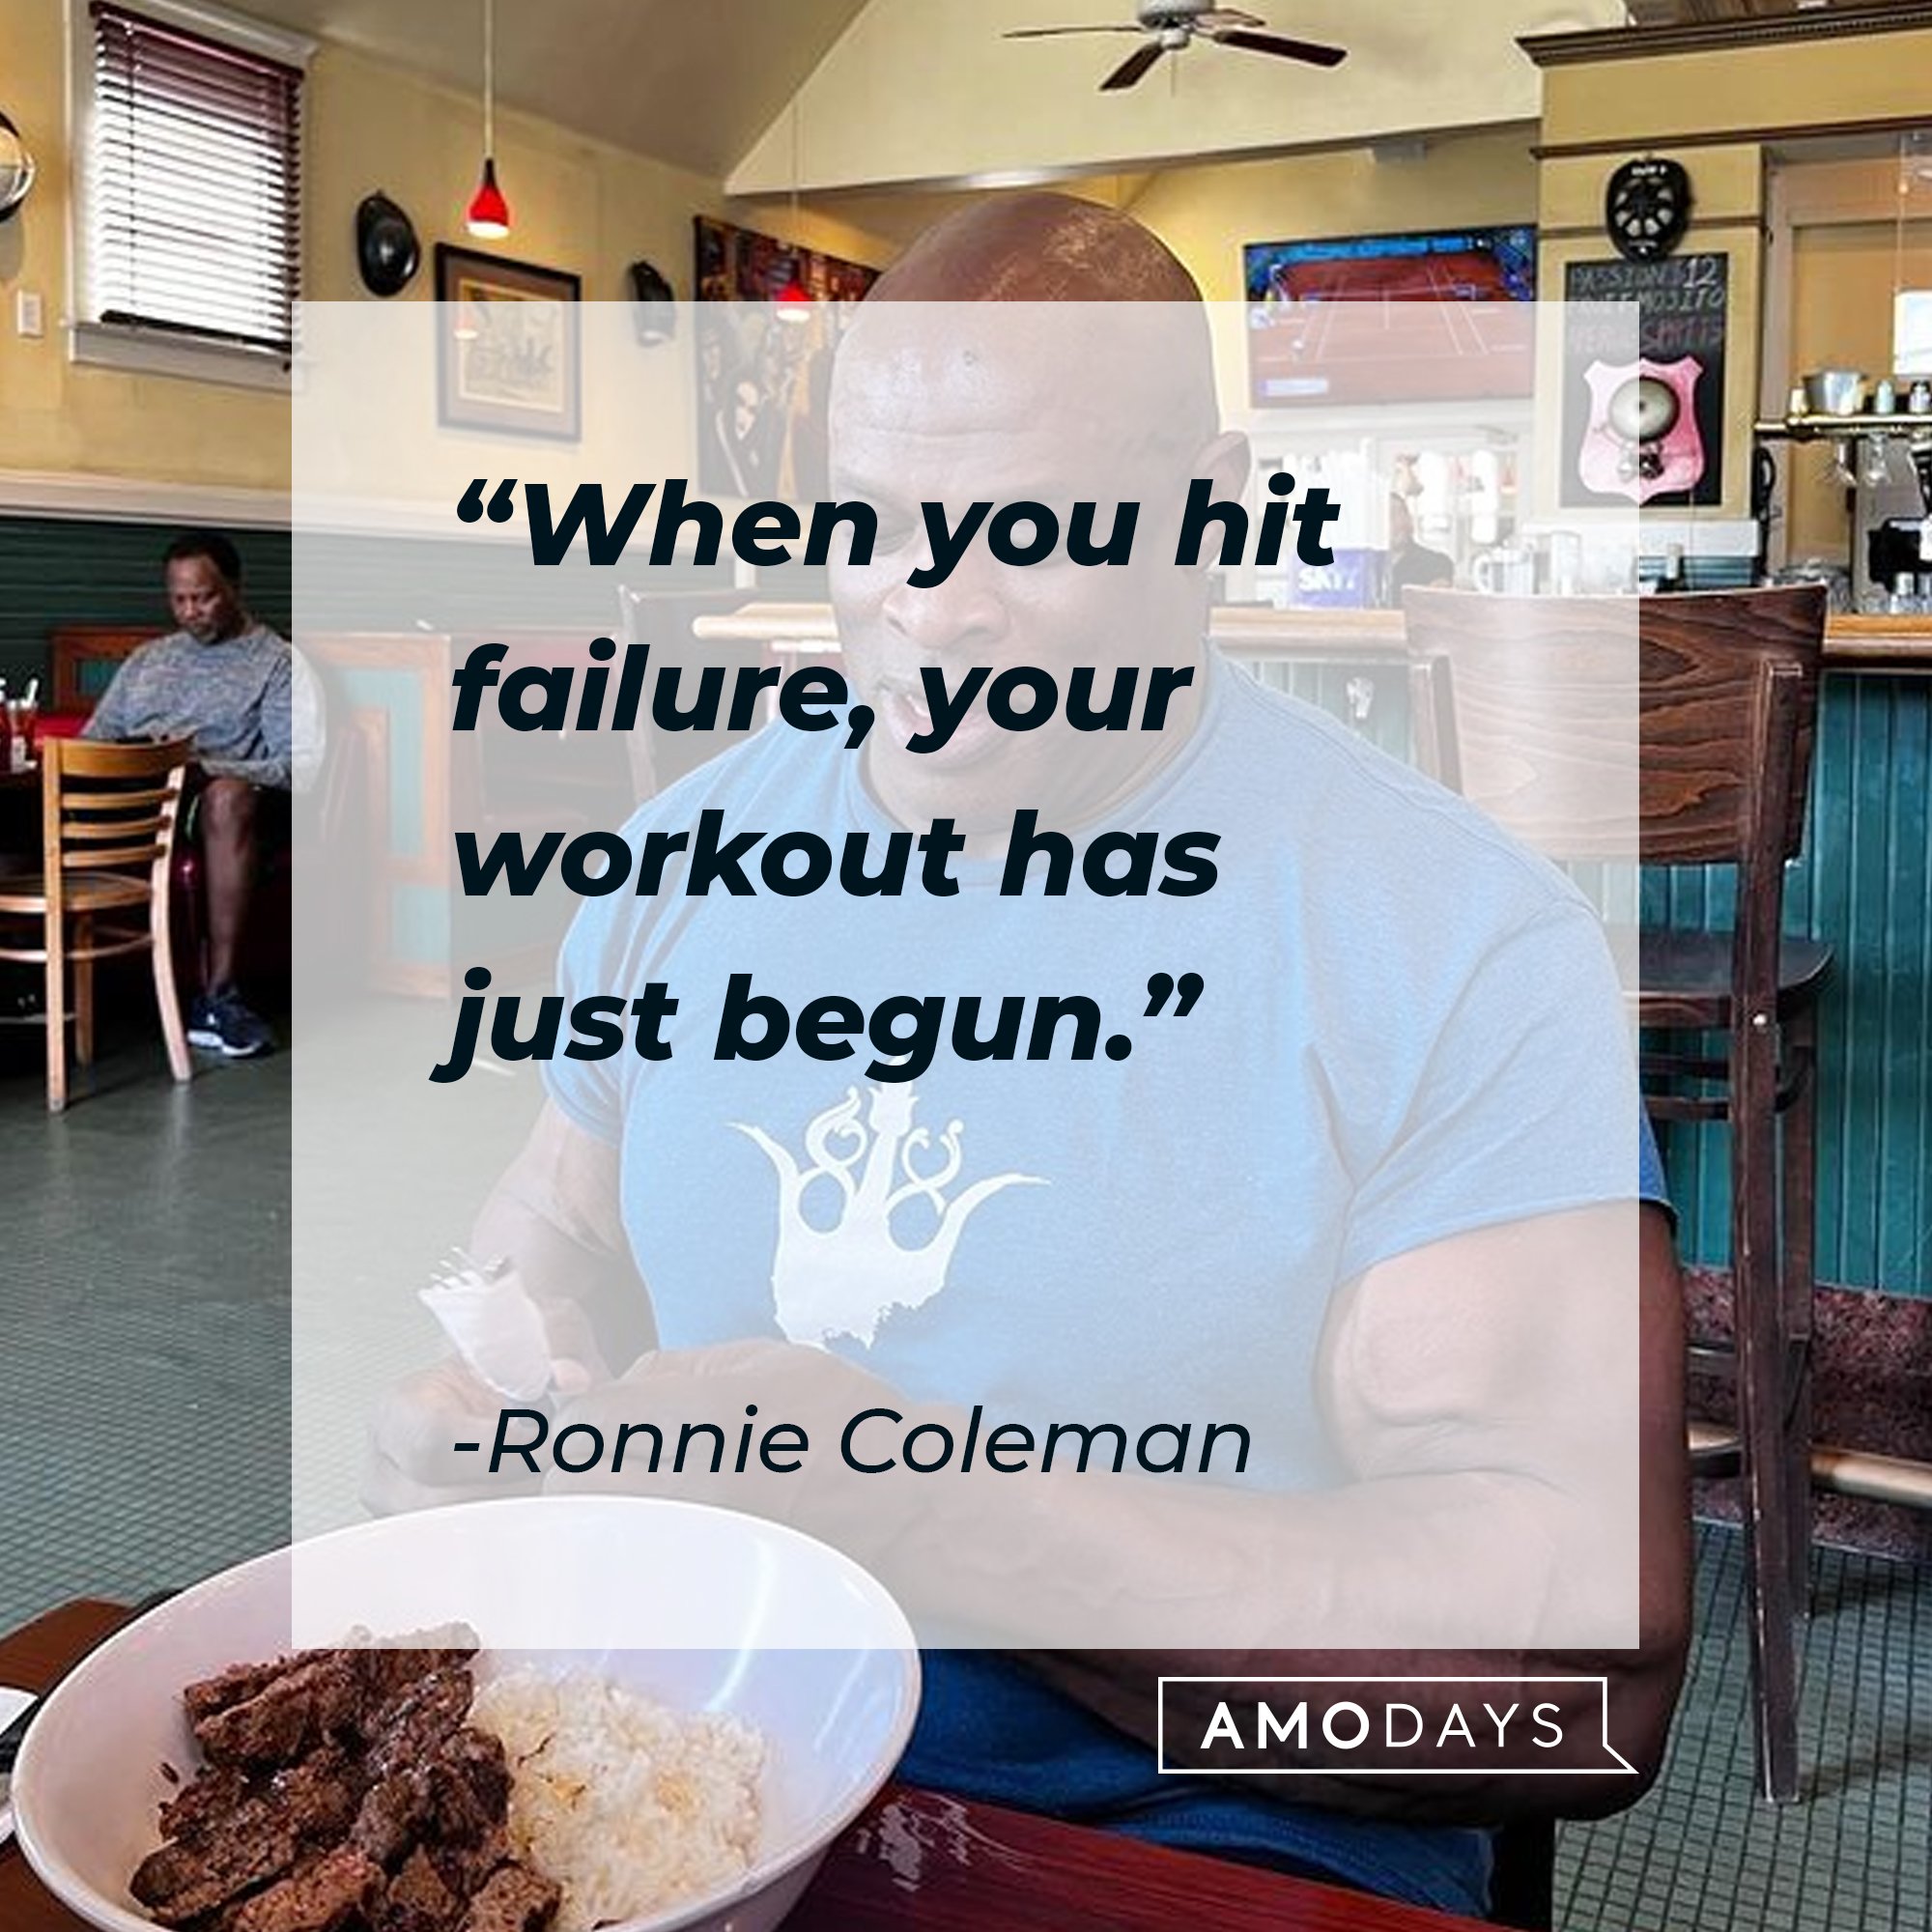  Ronnie Coleman’s quote: "When you hit failure, your workout has just begun.” | Image: AmoDays